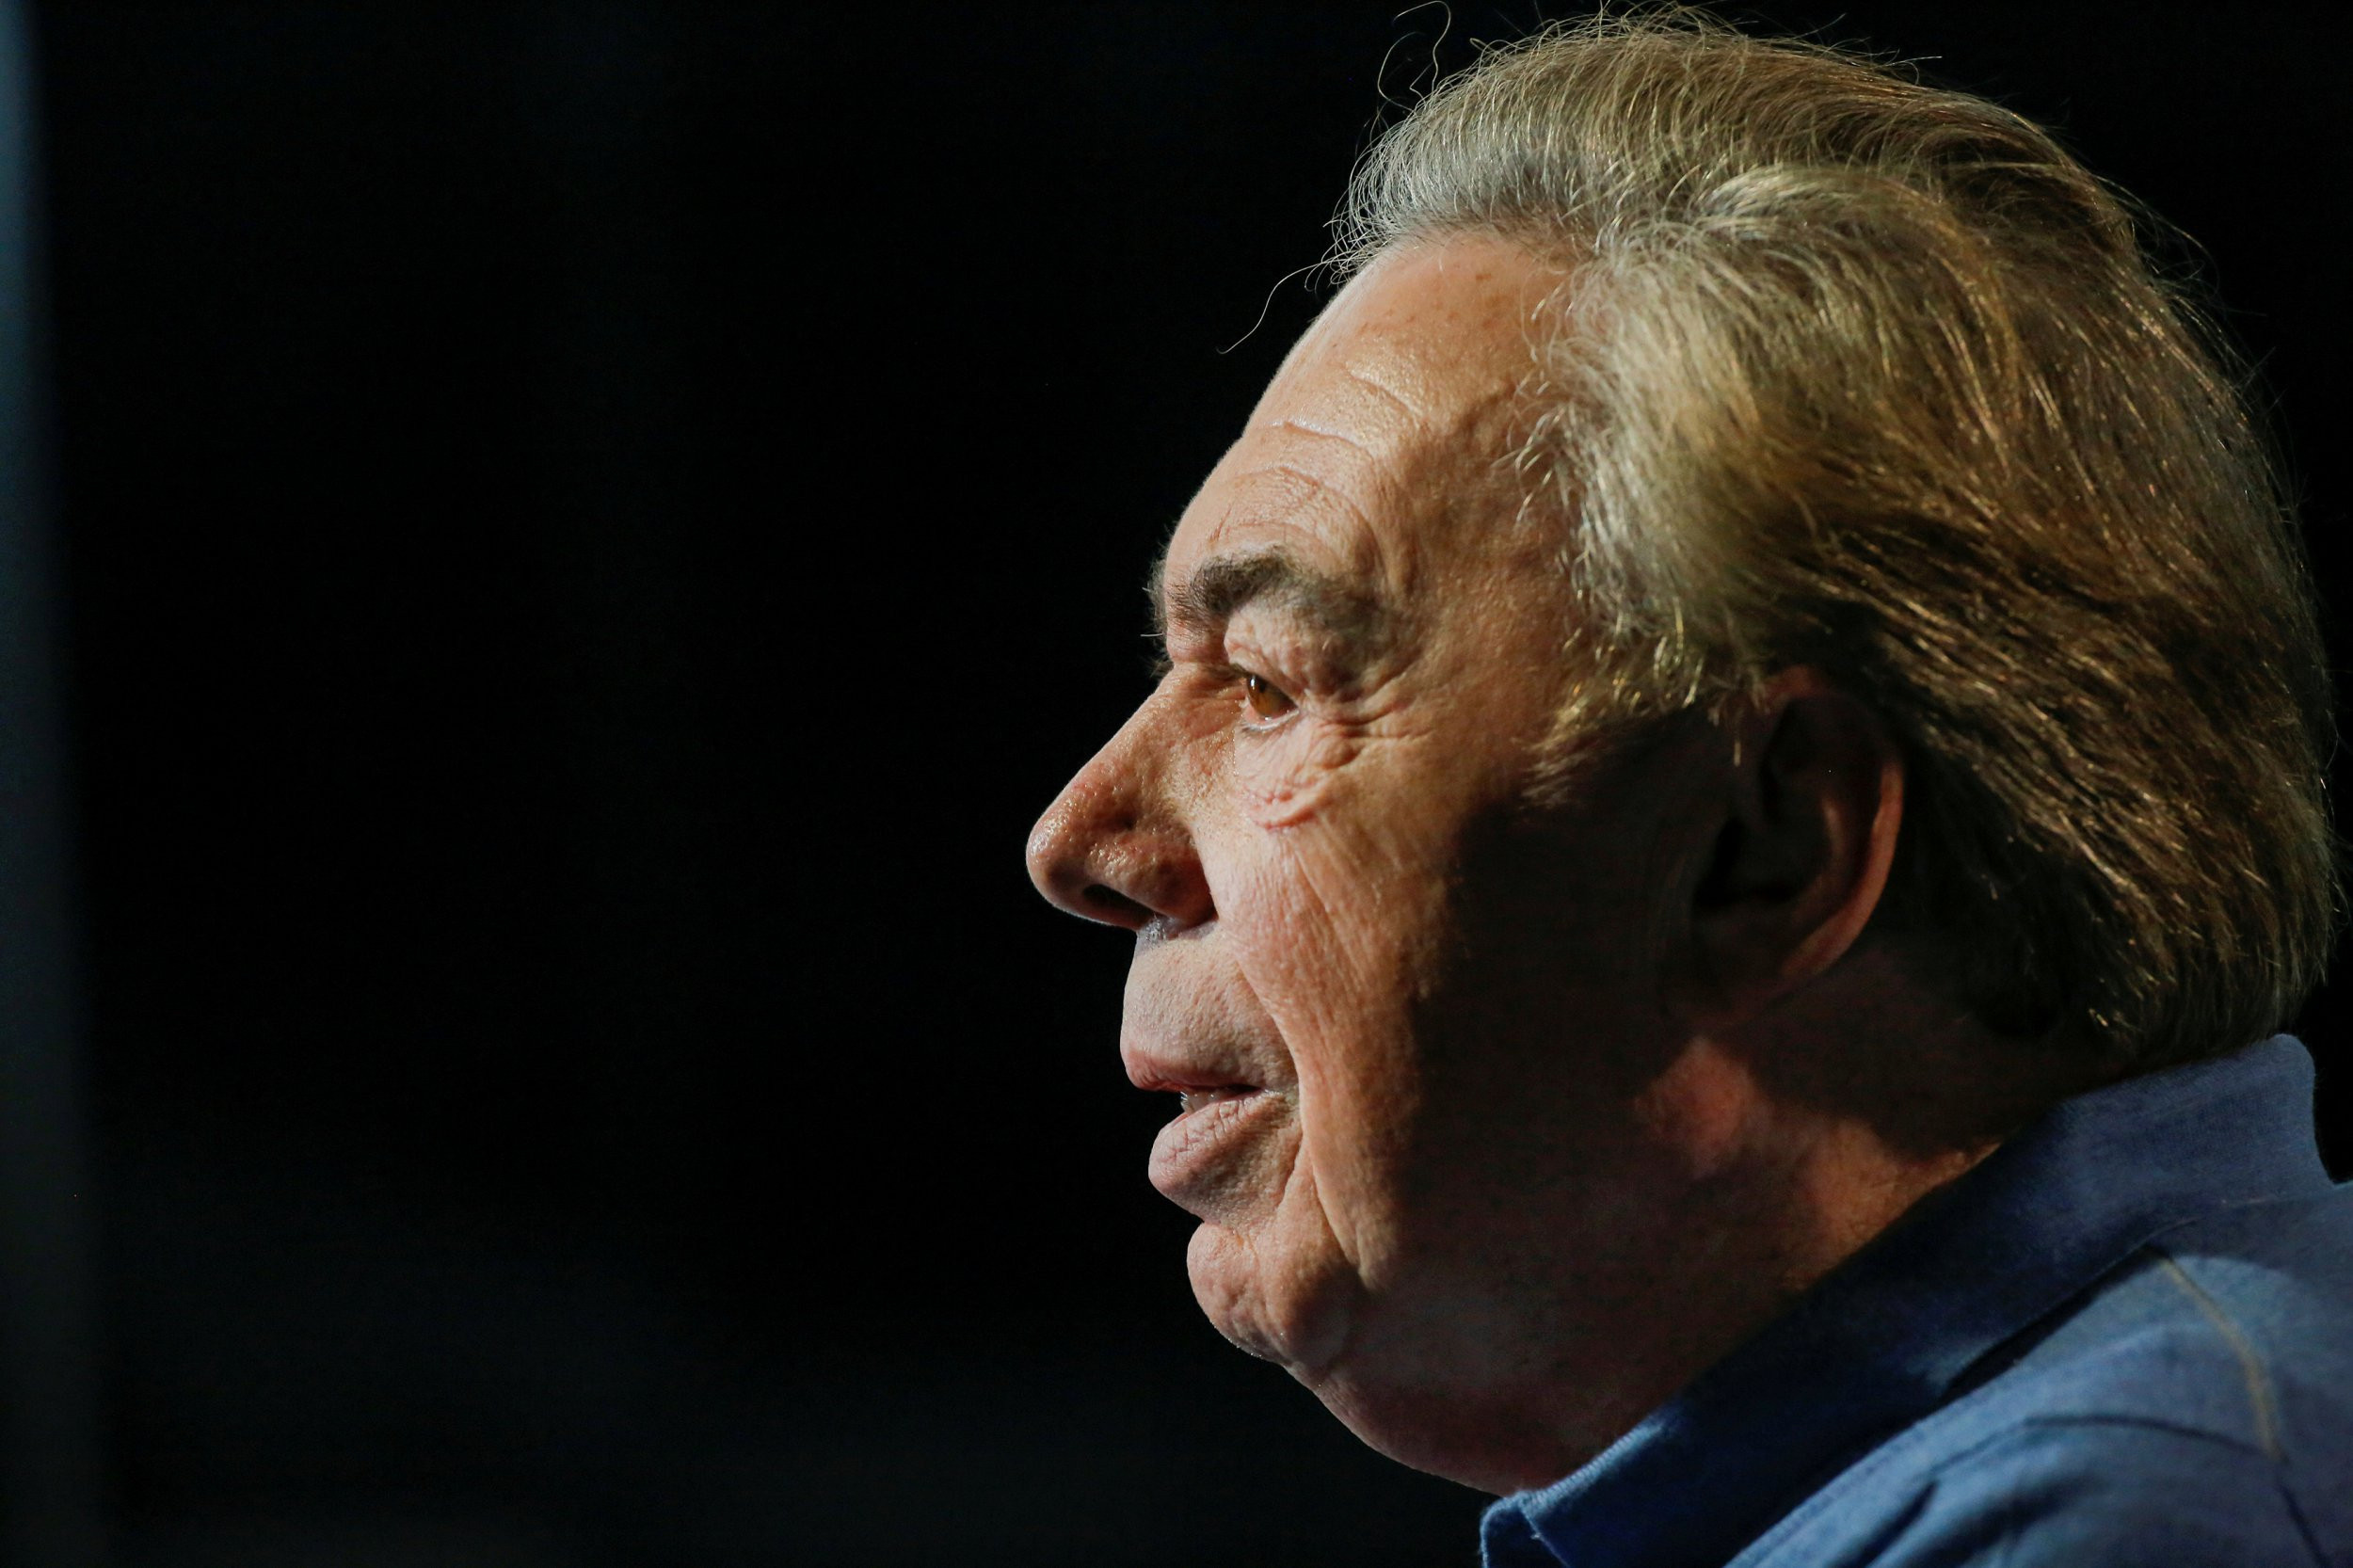 Andrew Lloyd Webber launches legal action over Government test events programme